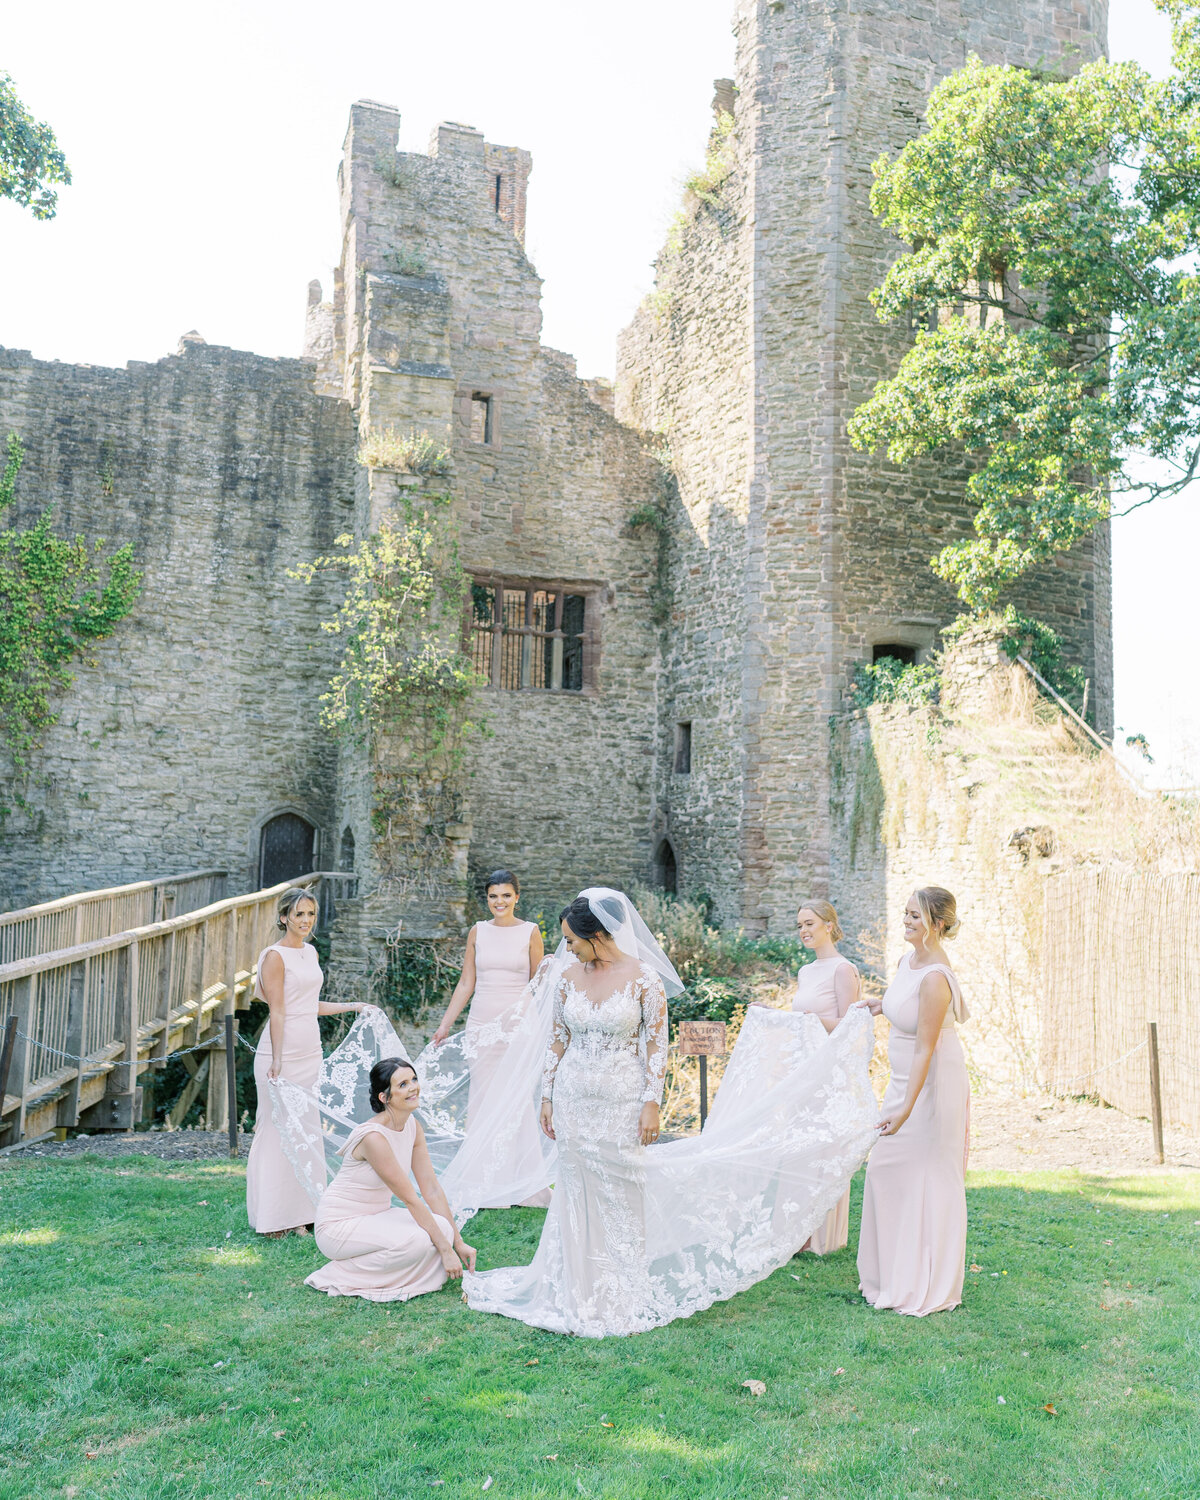 Bride and her bridesmaids at marquee wedding in an English castle